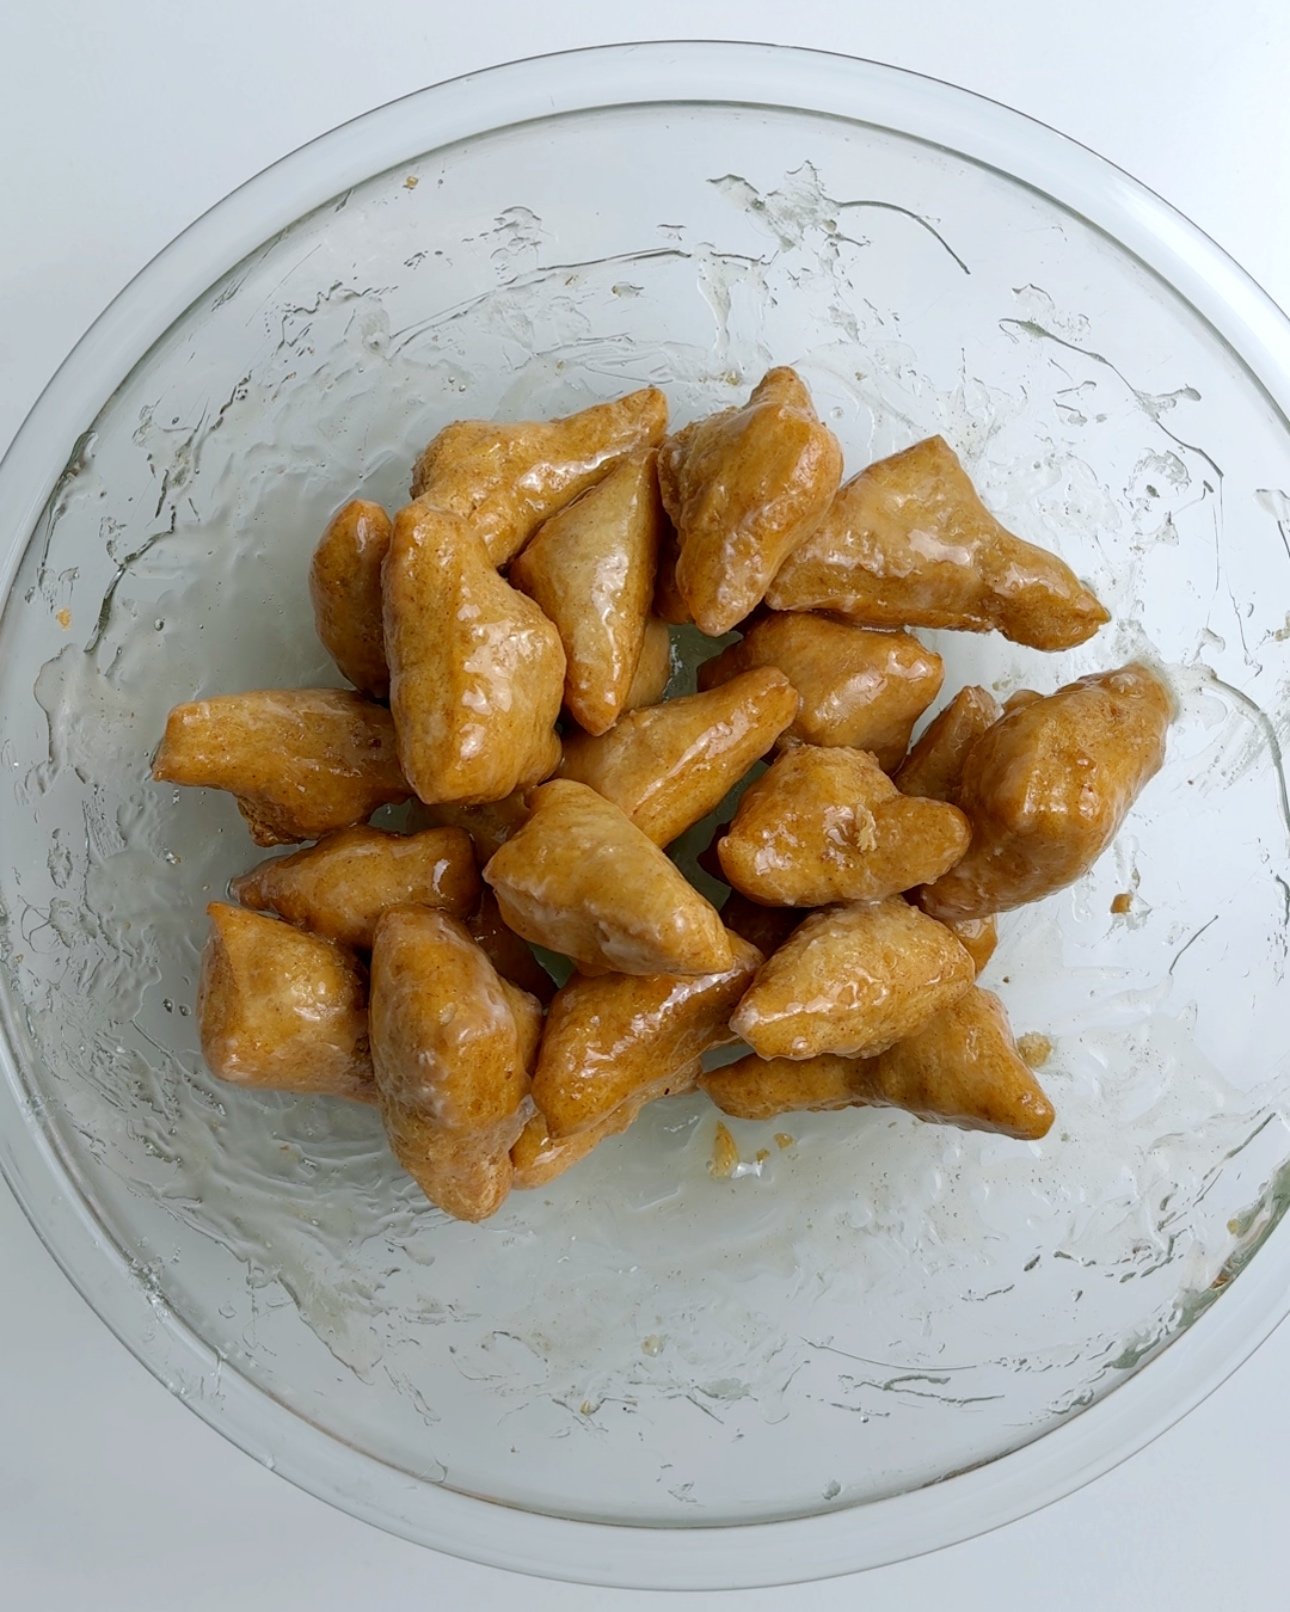 Mithai pieces coated in sugar resting in a glass bowl